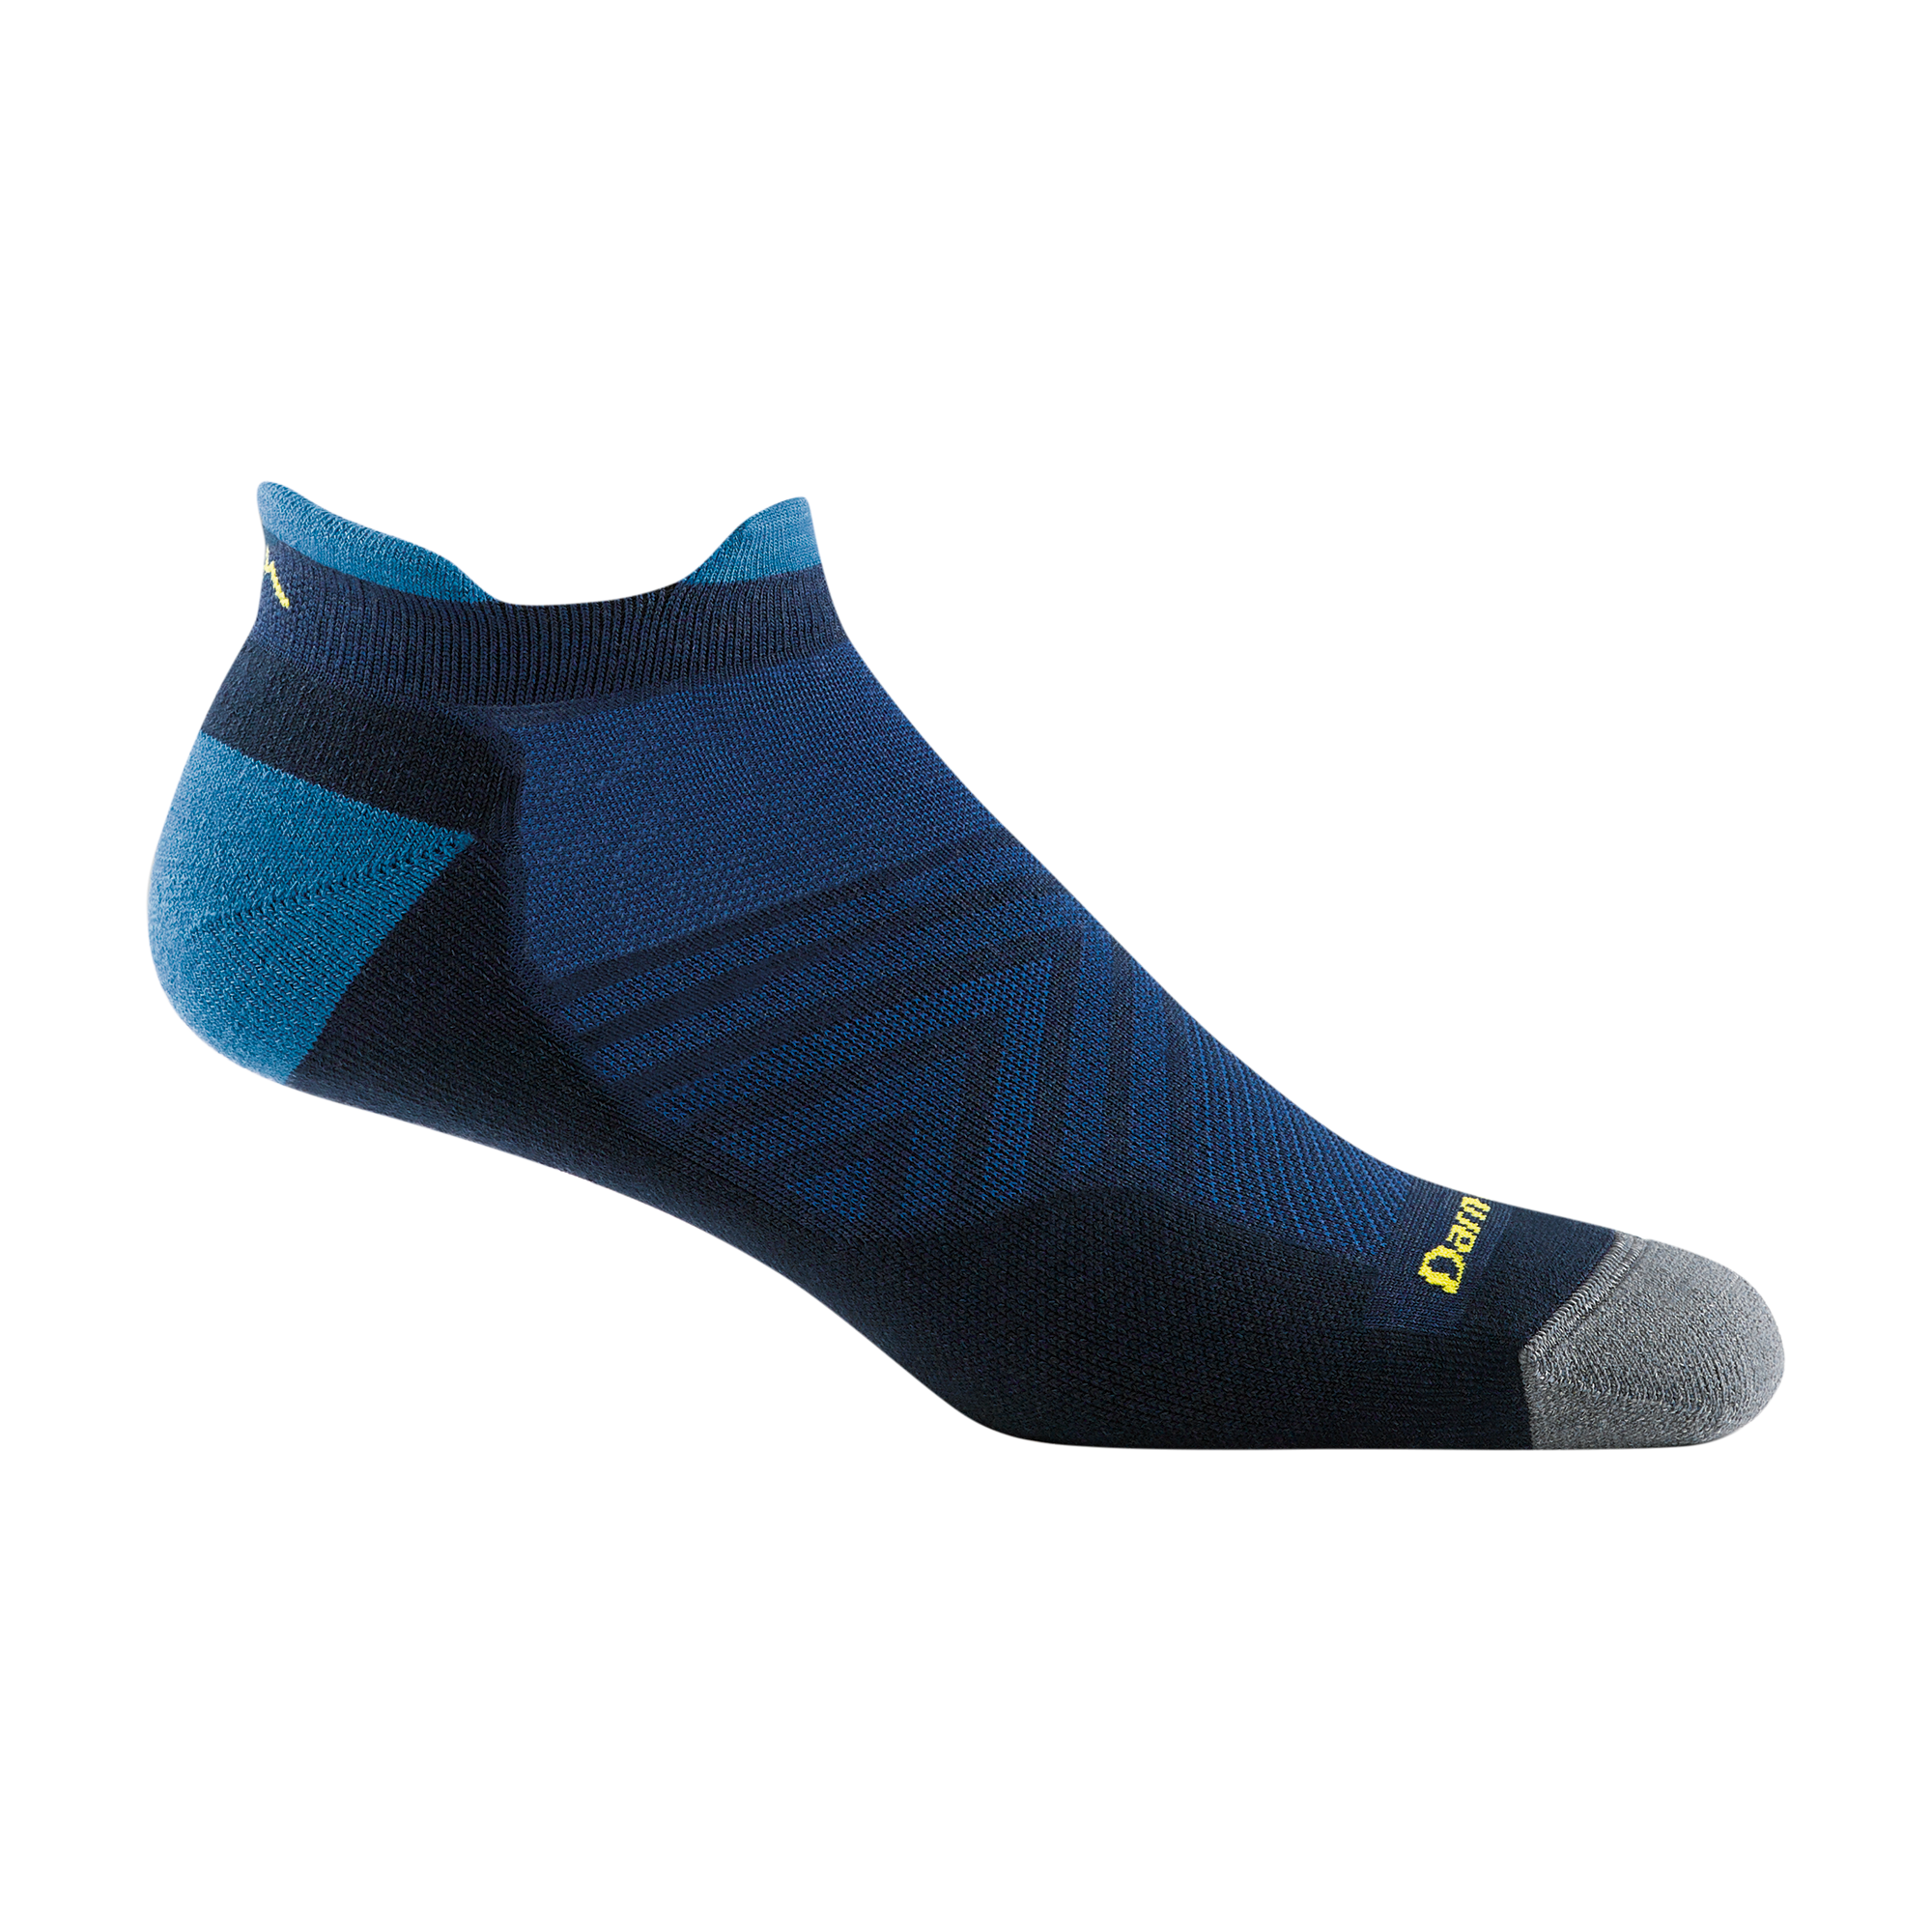 1039 men's no show tab running sock in navy blue with gray toe and medium blue heel and tab accents